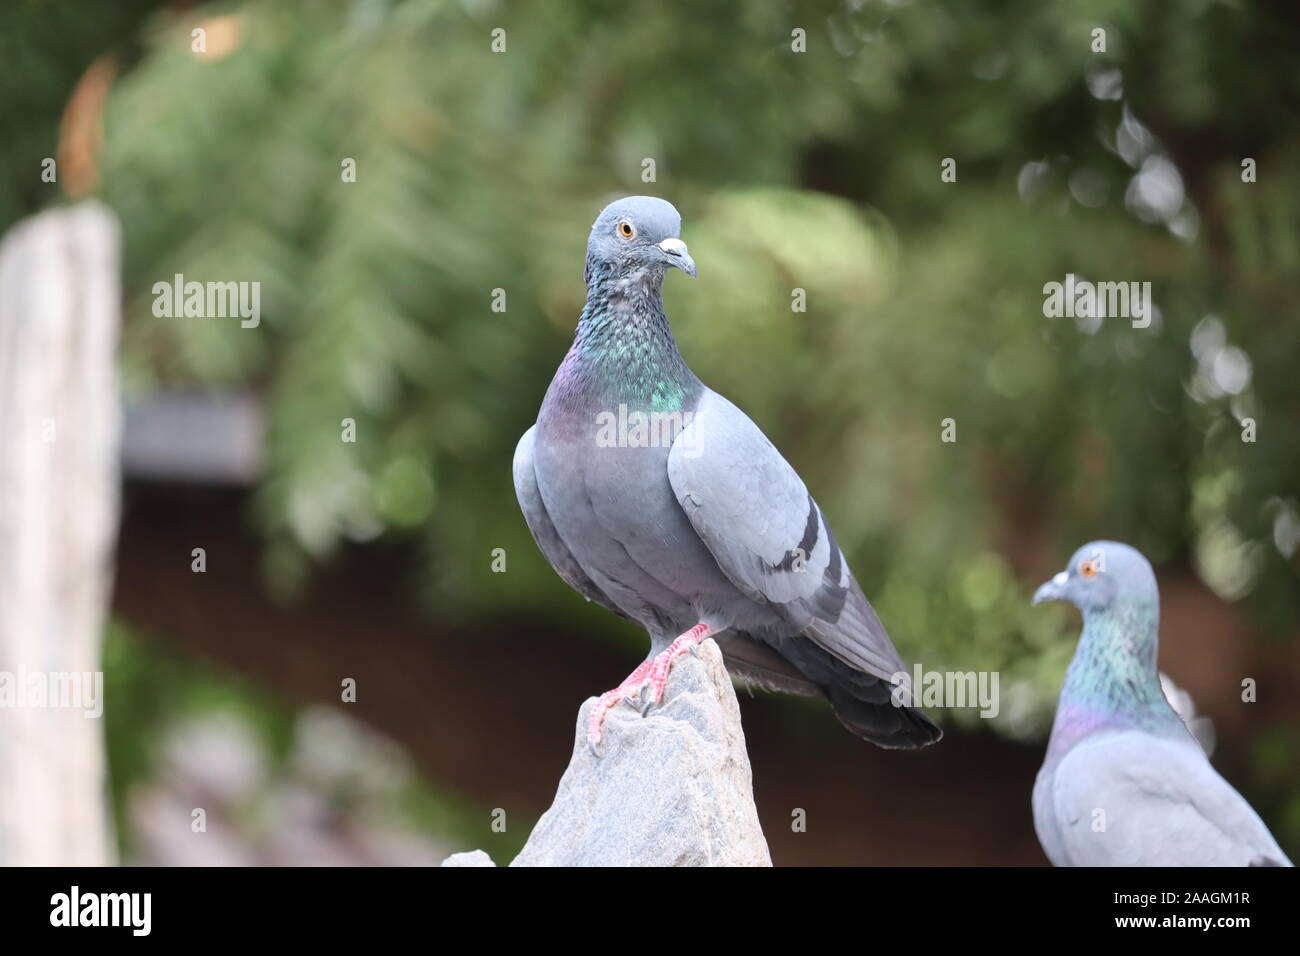 Front view of the face of Rock Pigeon face to face.Rock Pigeons crowd streets and public squares, living on discarded food and offerings of birdseed. Stock Photo